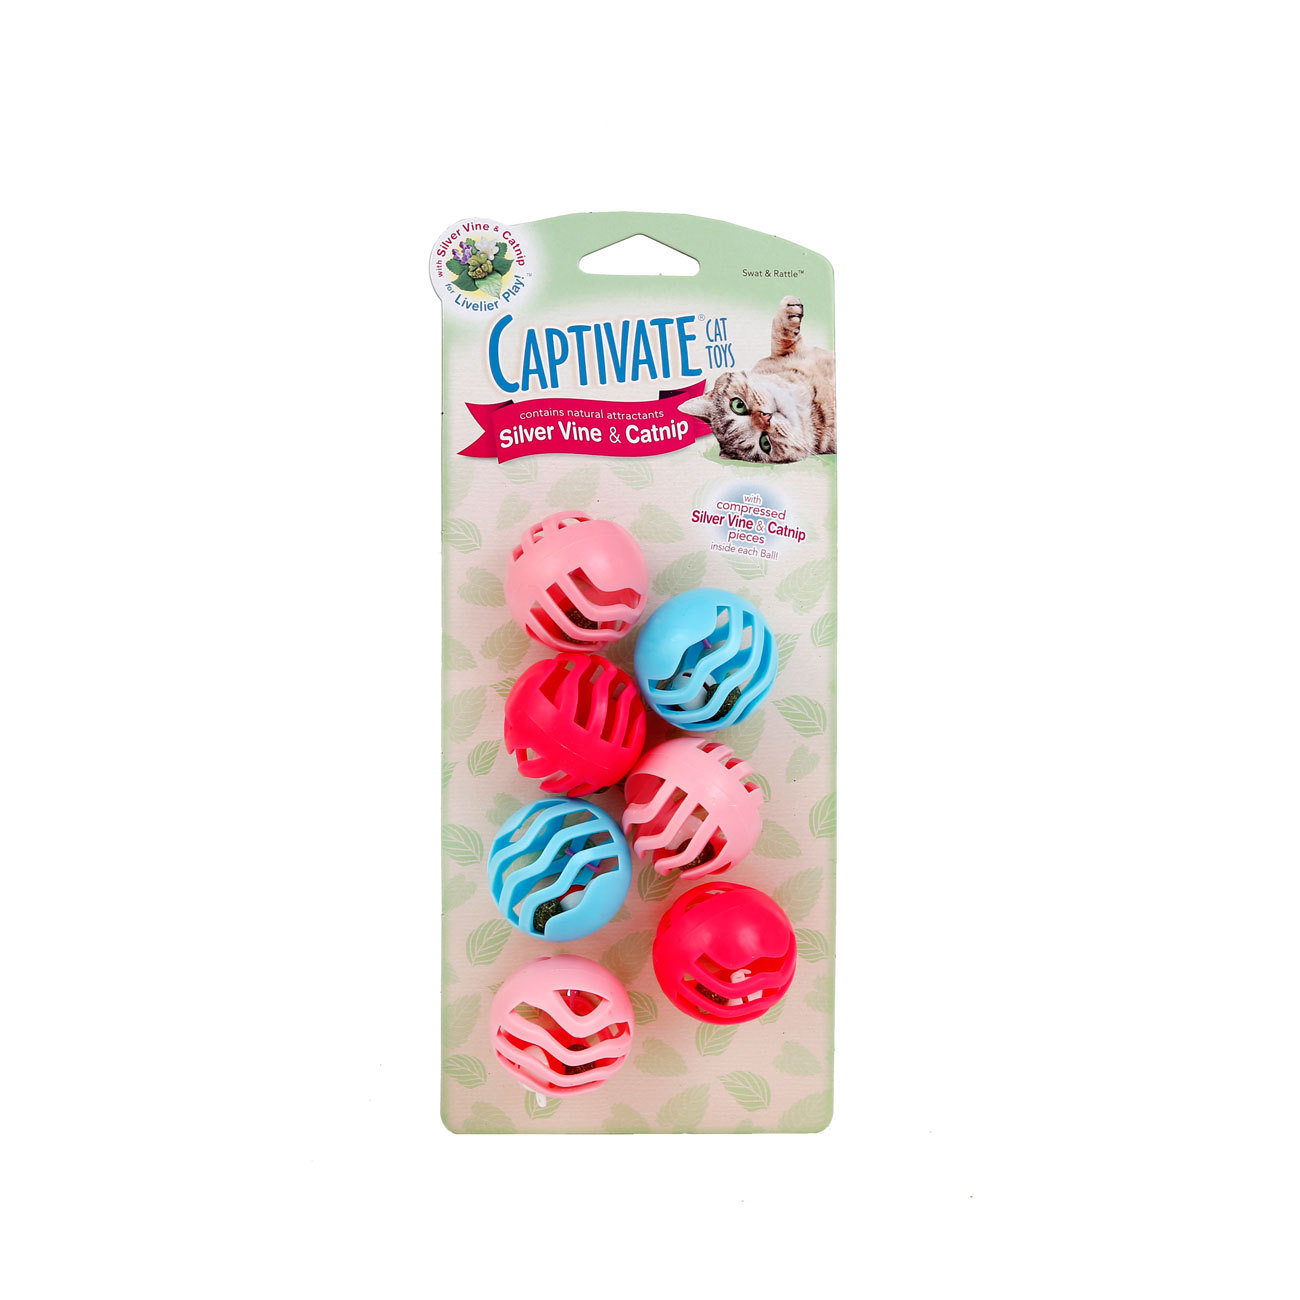 Captivate swat and rattle cat toy.